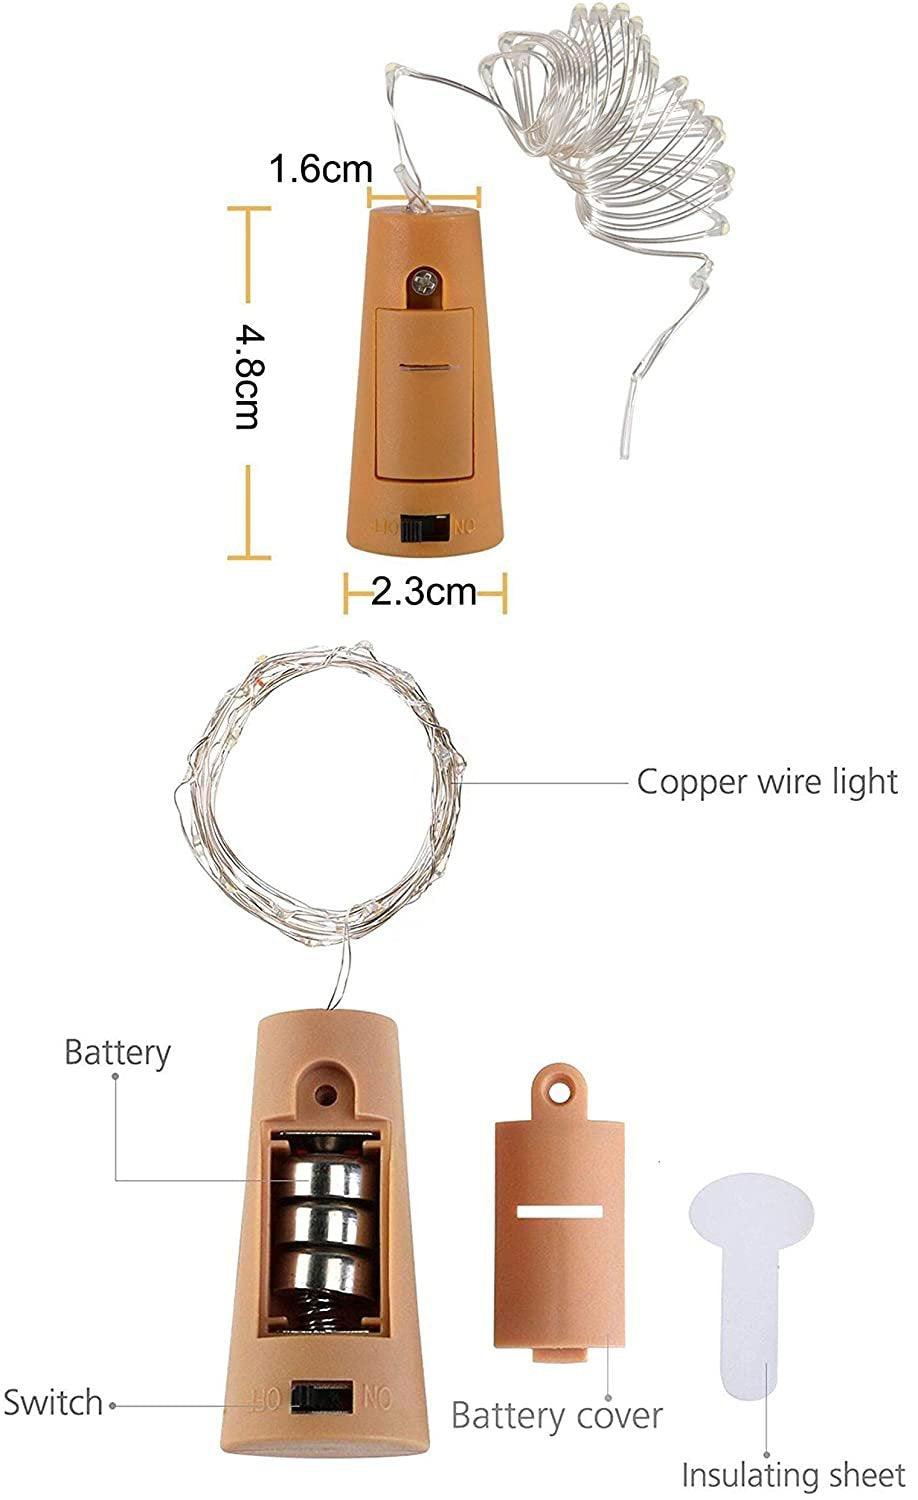 Fairy Mini String Lights Copper Wire, Battery Operated Starry Lights for DIY - Decotree.co Online Shop